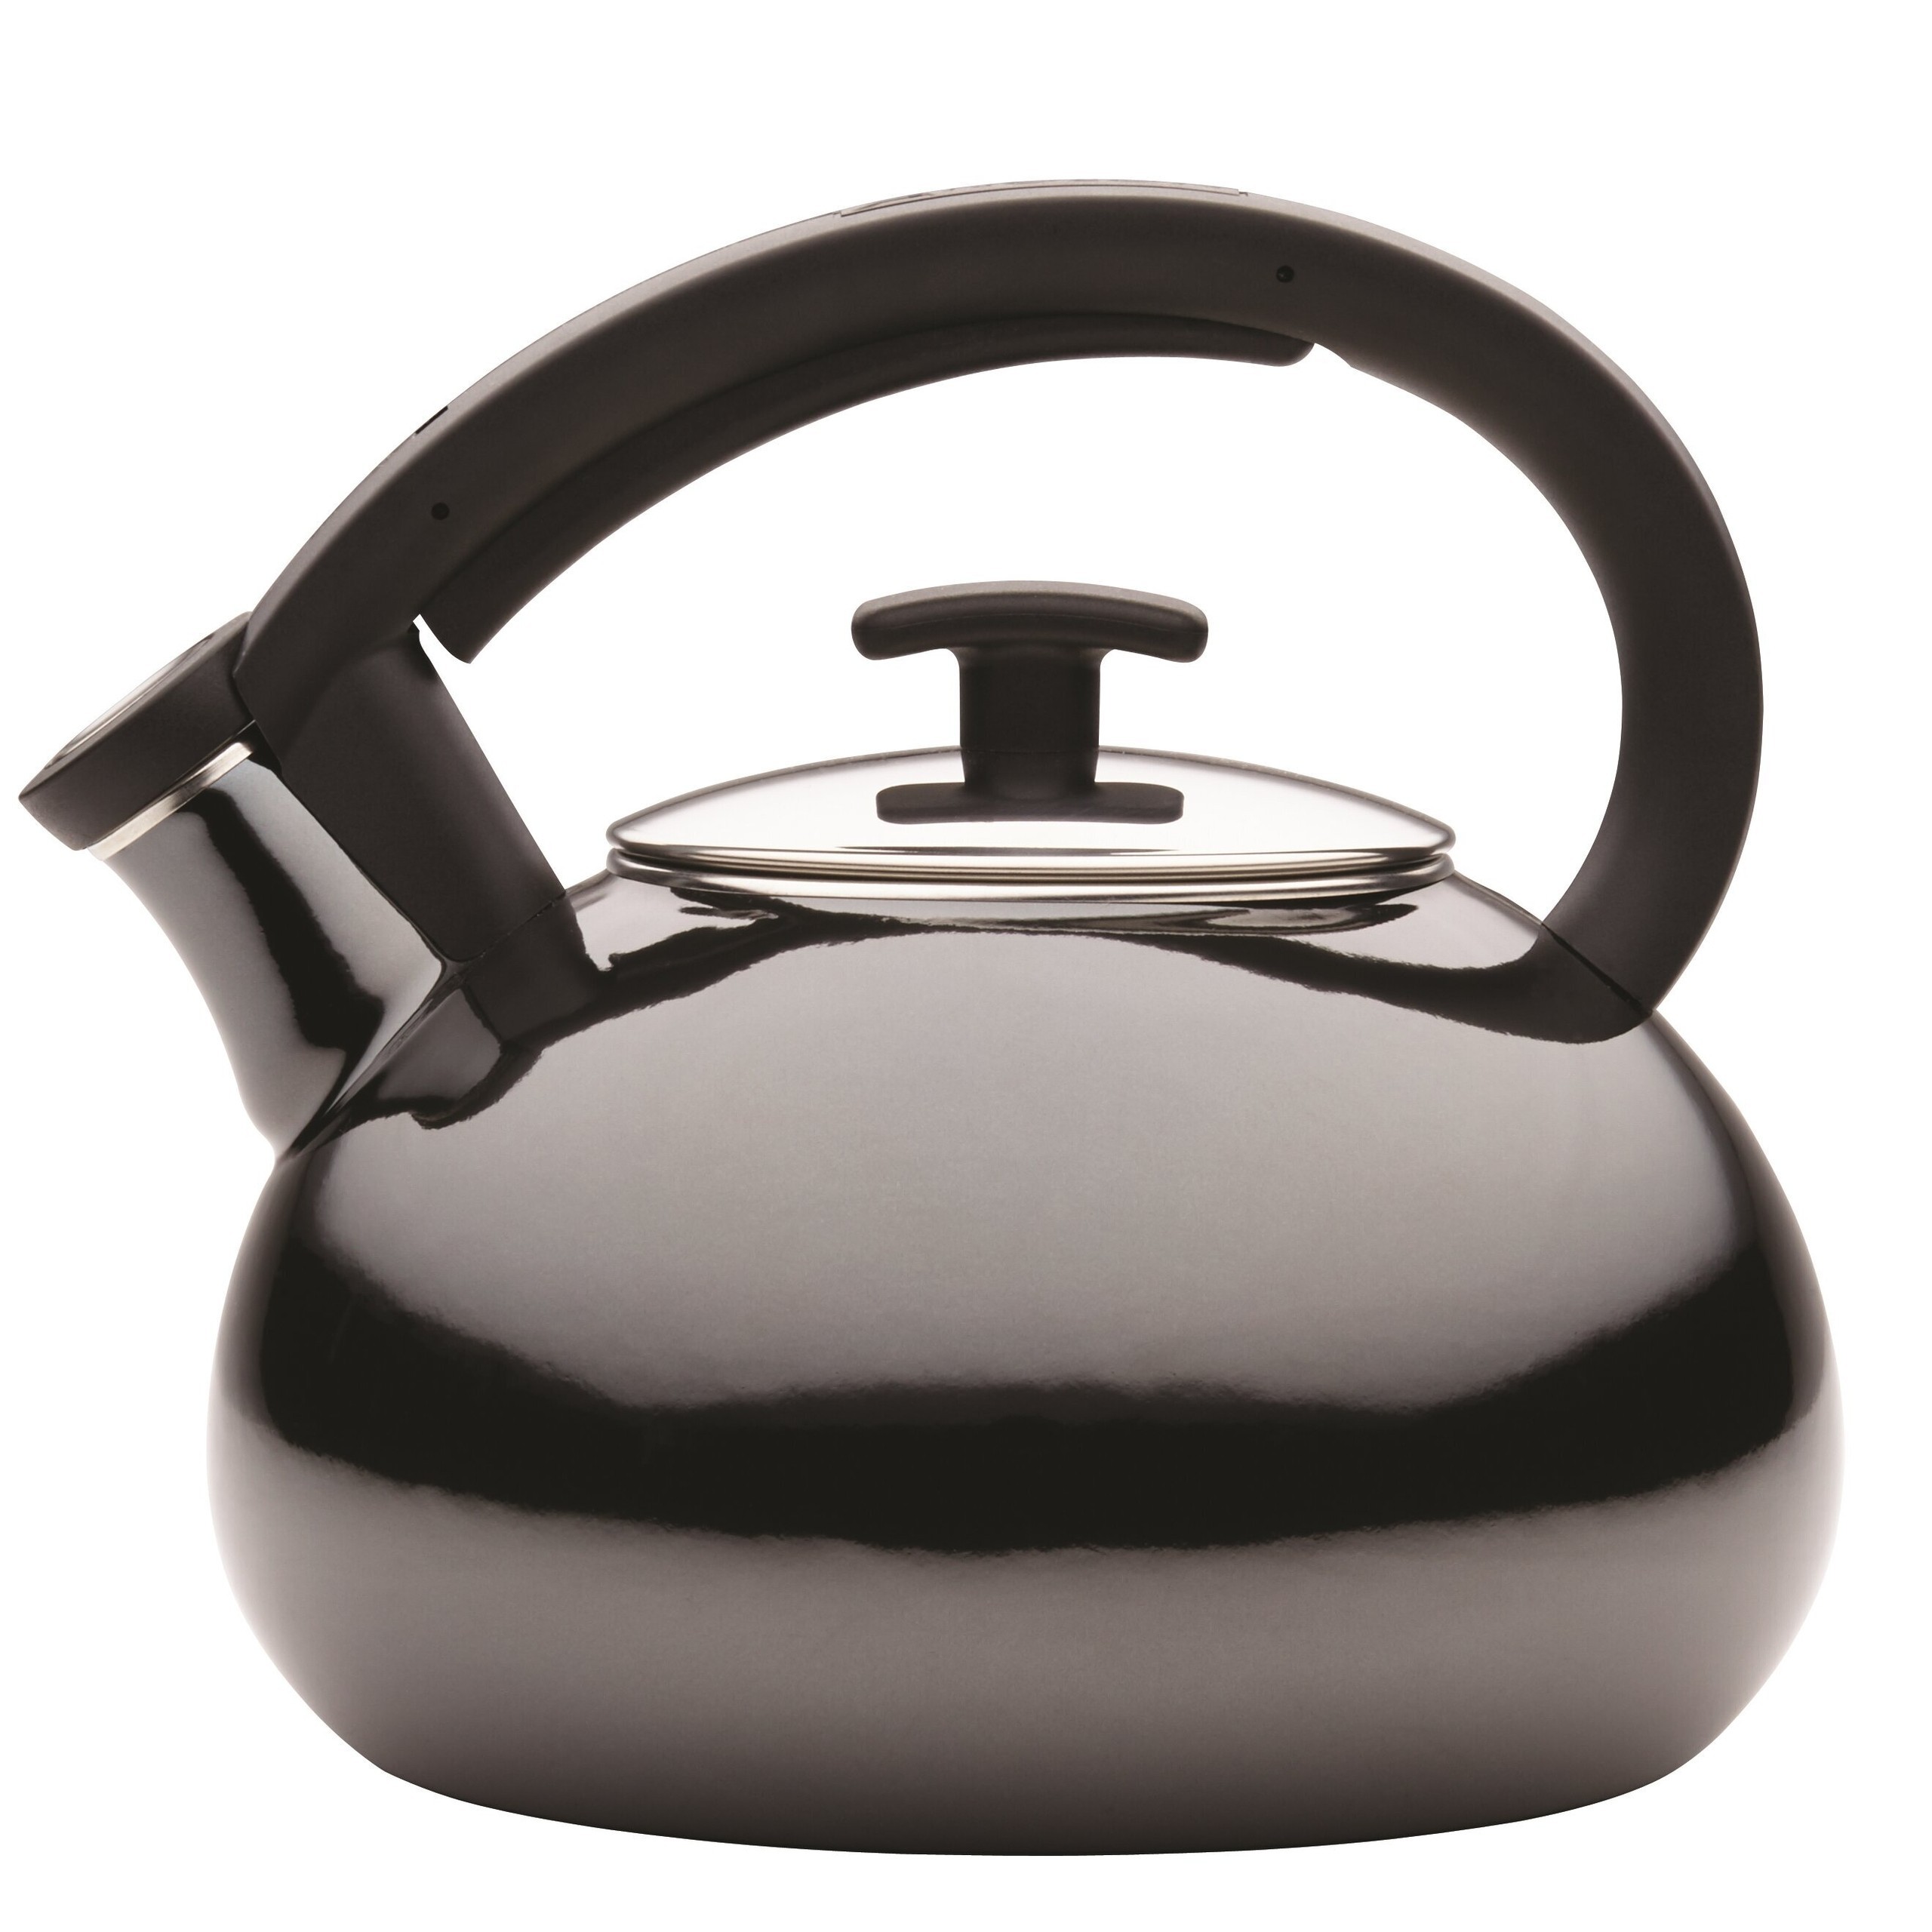 How to Choose the Best Tea Kettle